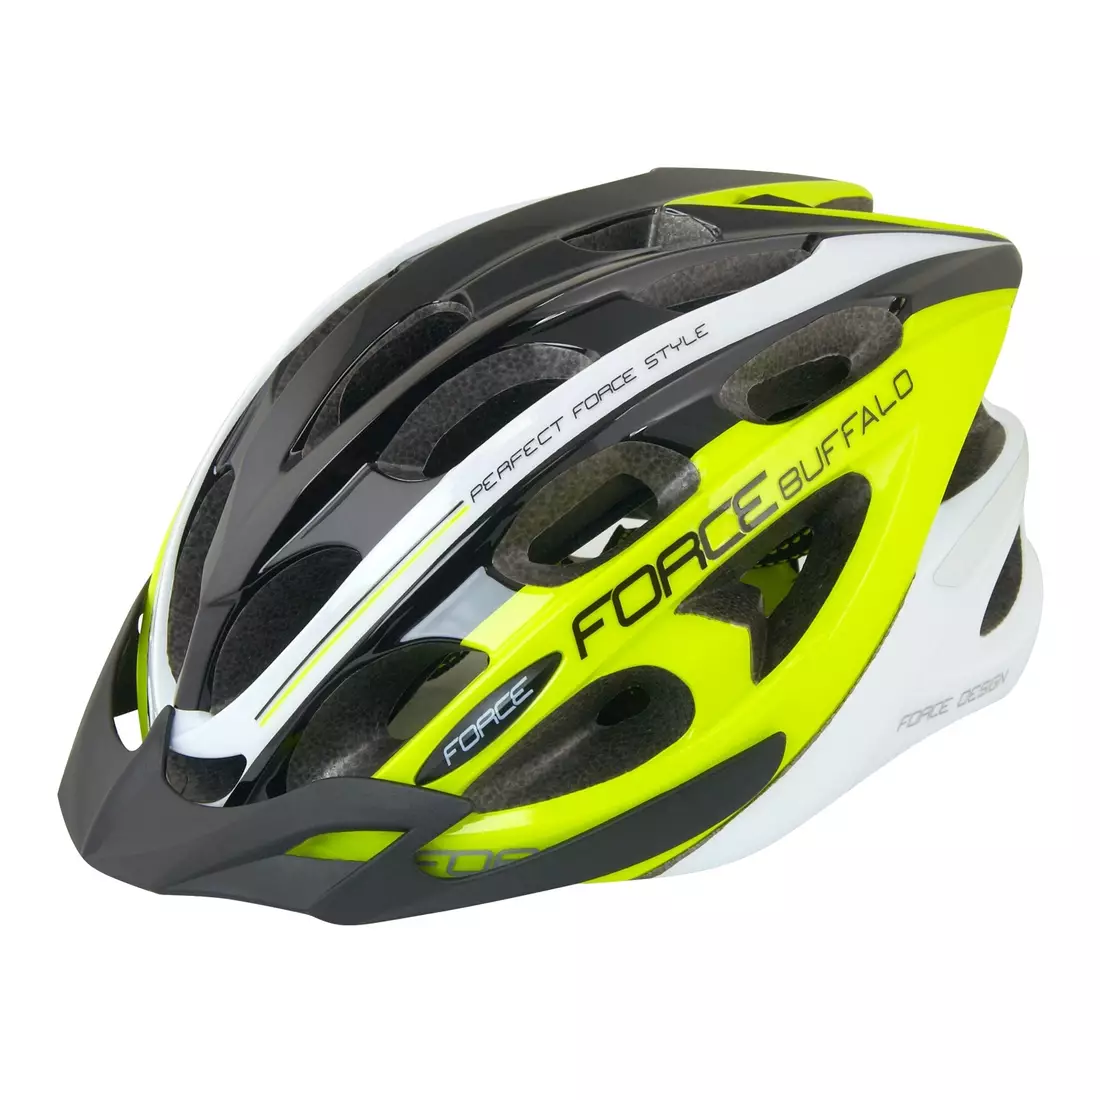 FORCE BUFFALO bicycle helmet, fluoro, black and white